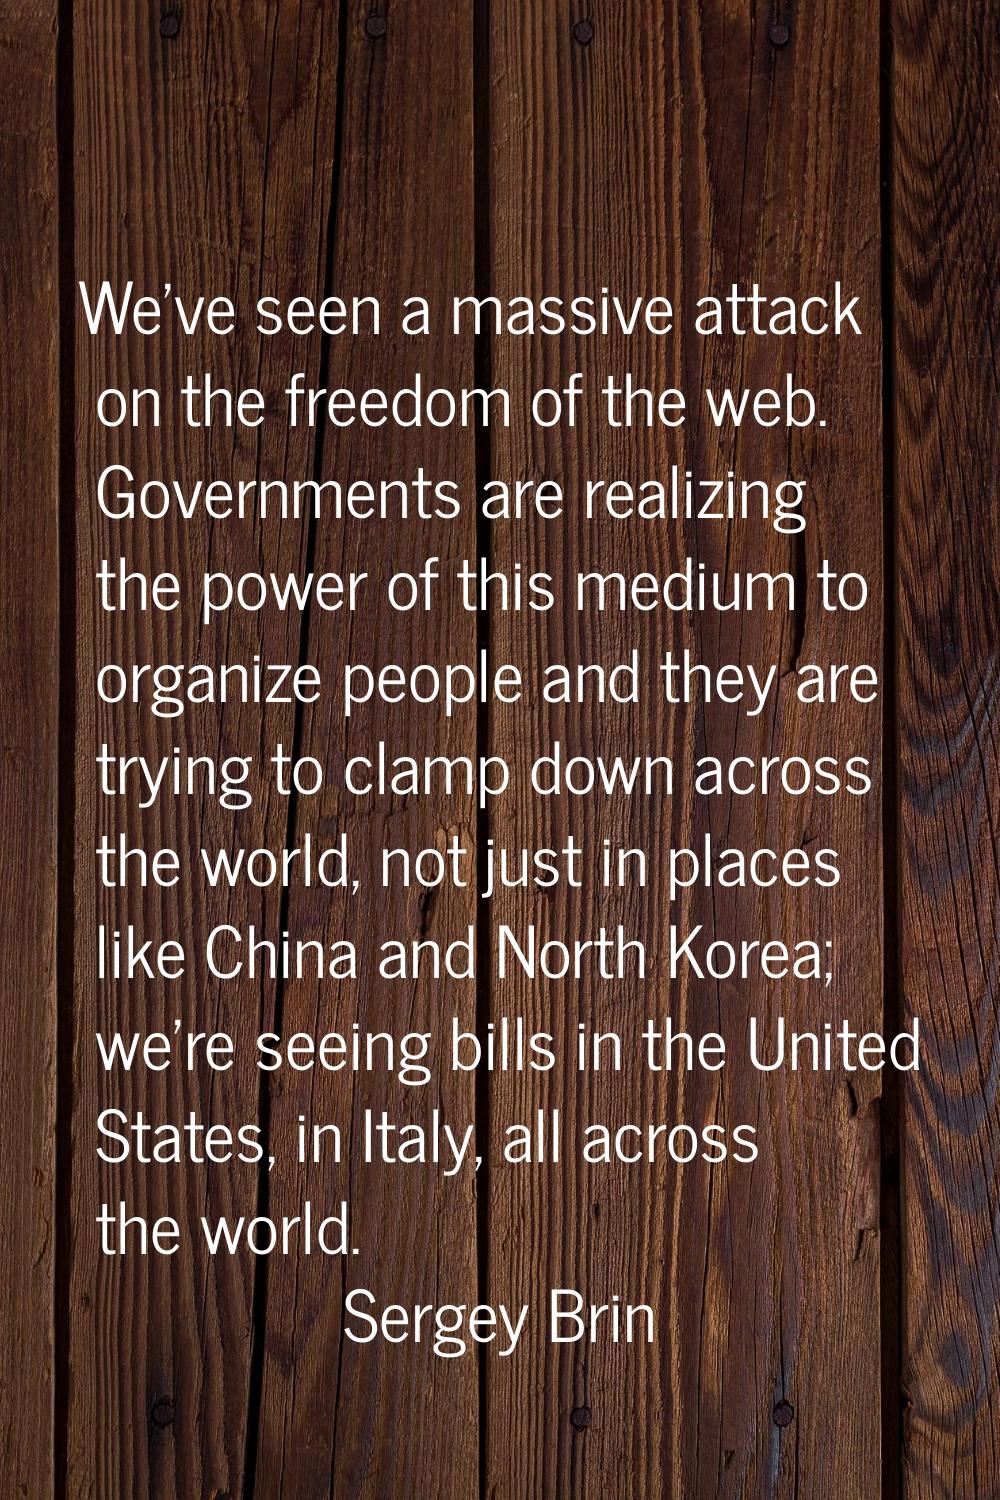 We've seen a massive attack on the freedom of the web. Governments are realizing the power of this 